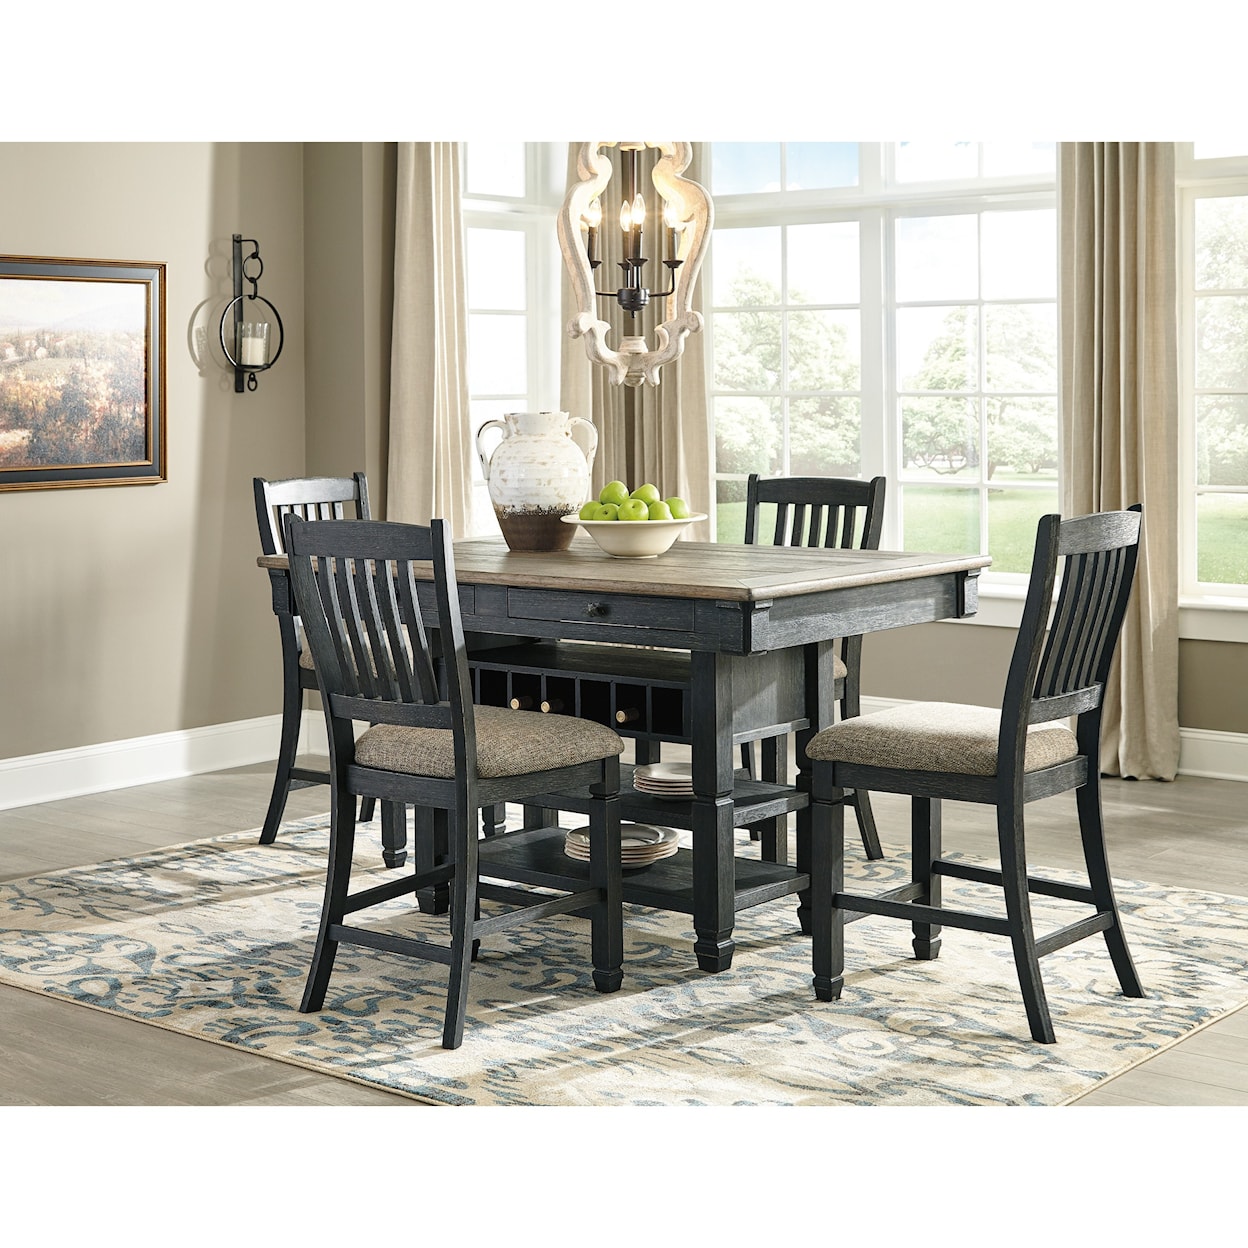 Ashley Furniture Signature Design Tyler Creek 5-Piece Counter Table and Stool Set